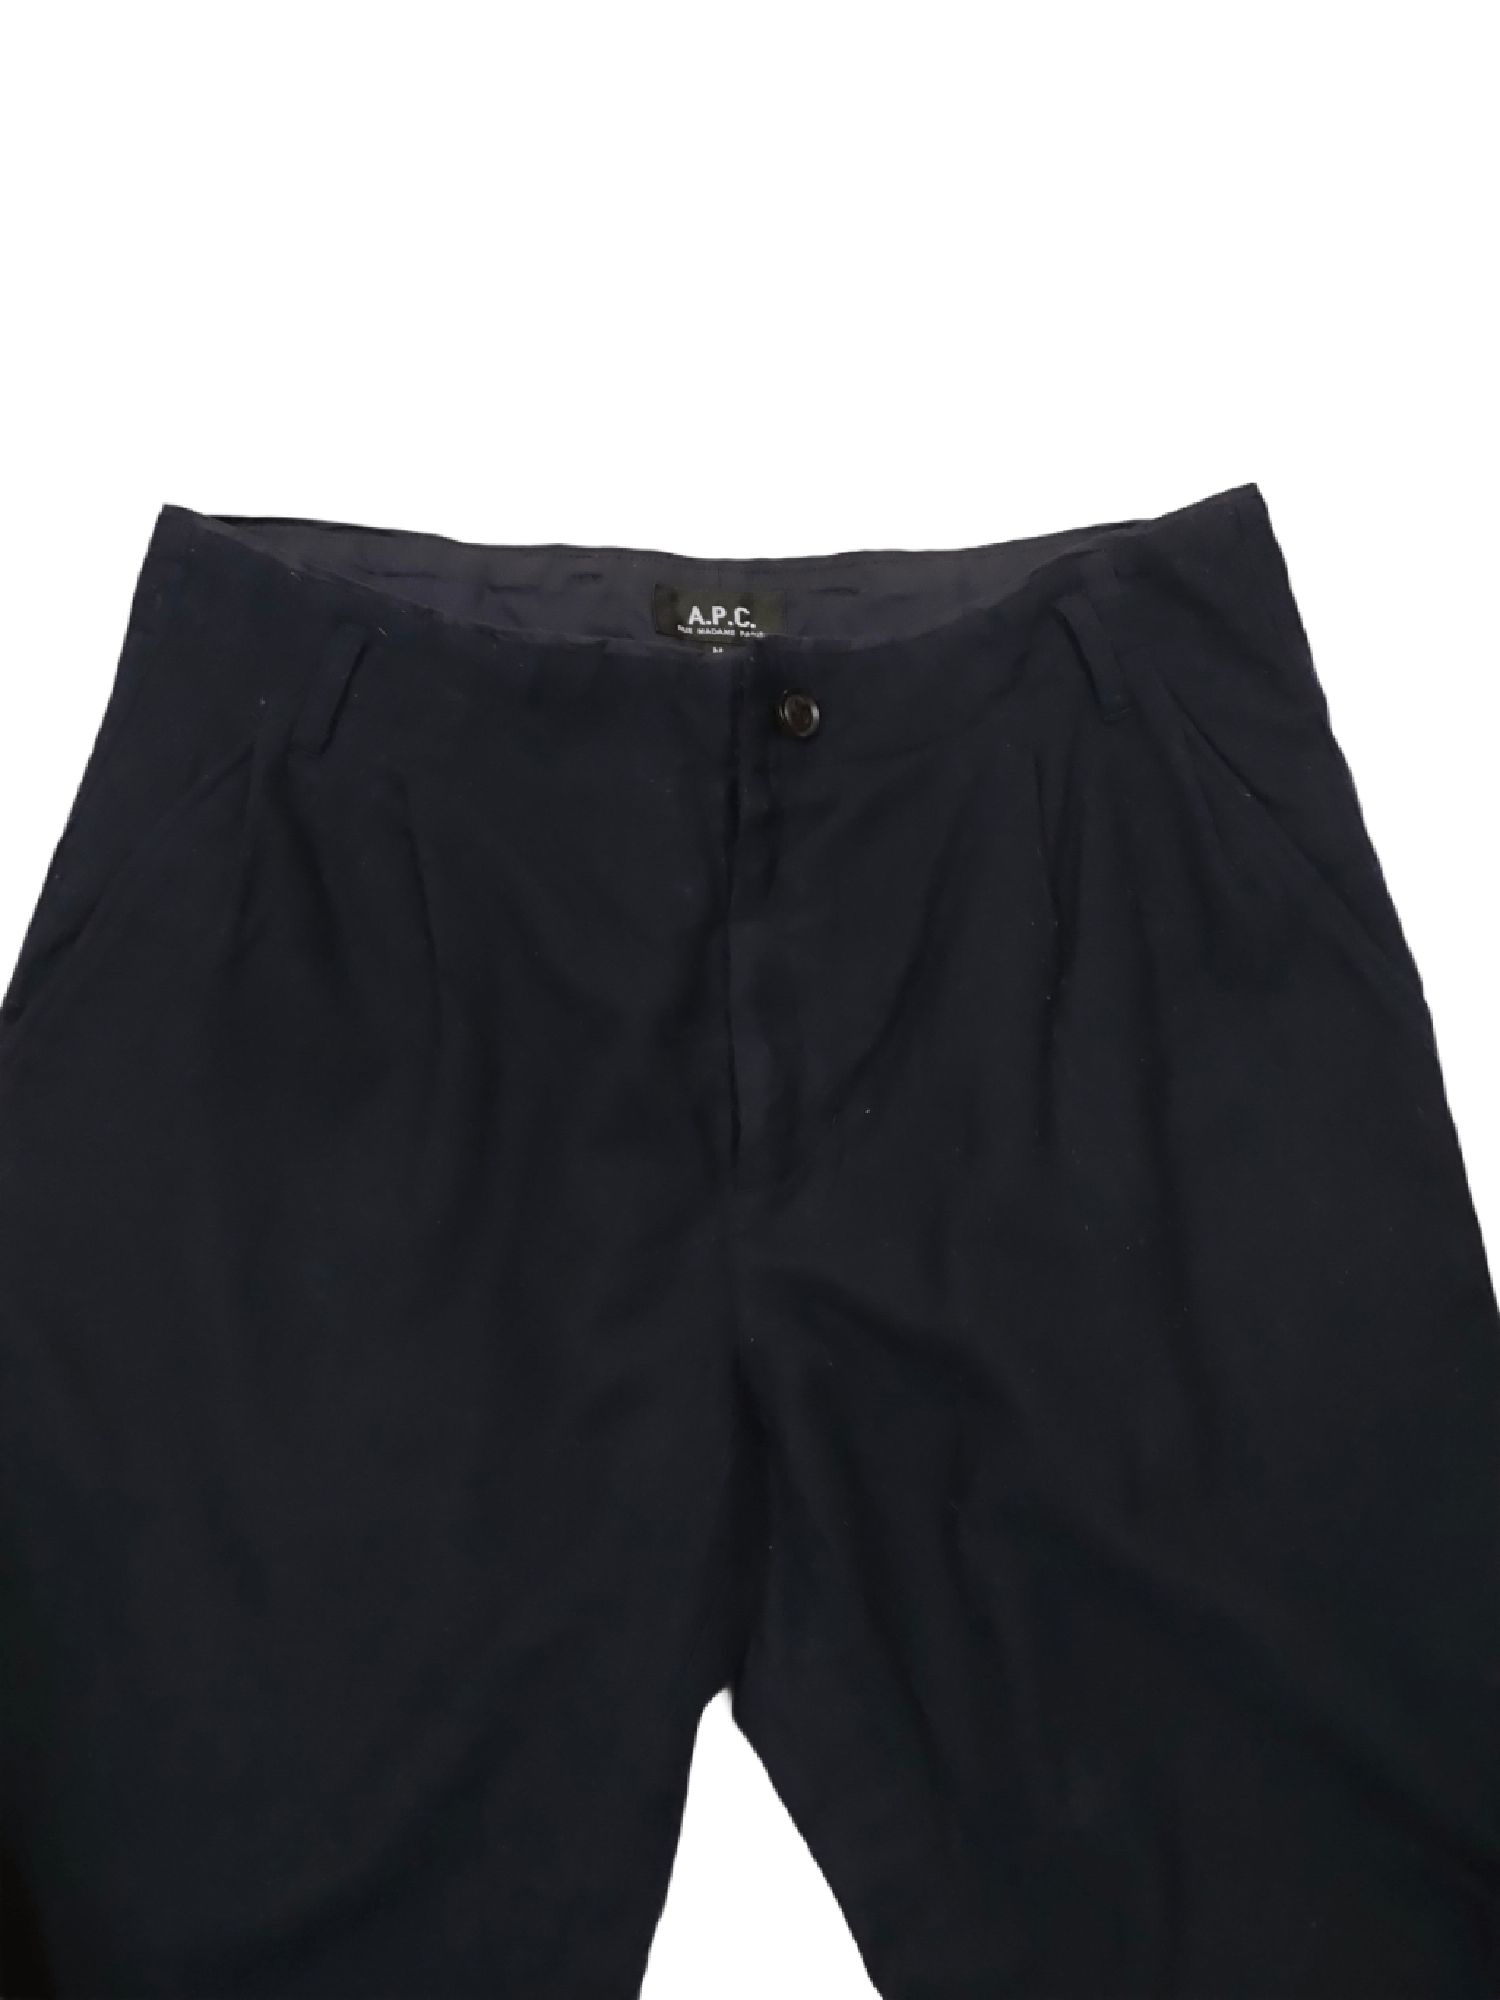 A.P.C. NEW WOOL NAVY BLUE CASUAL PANTS - 7